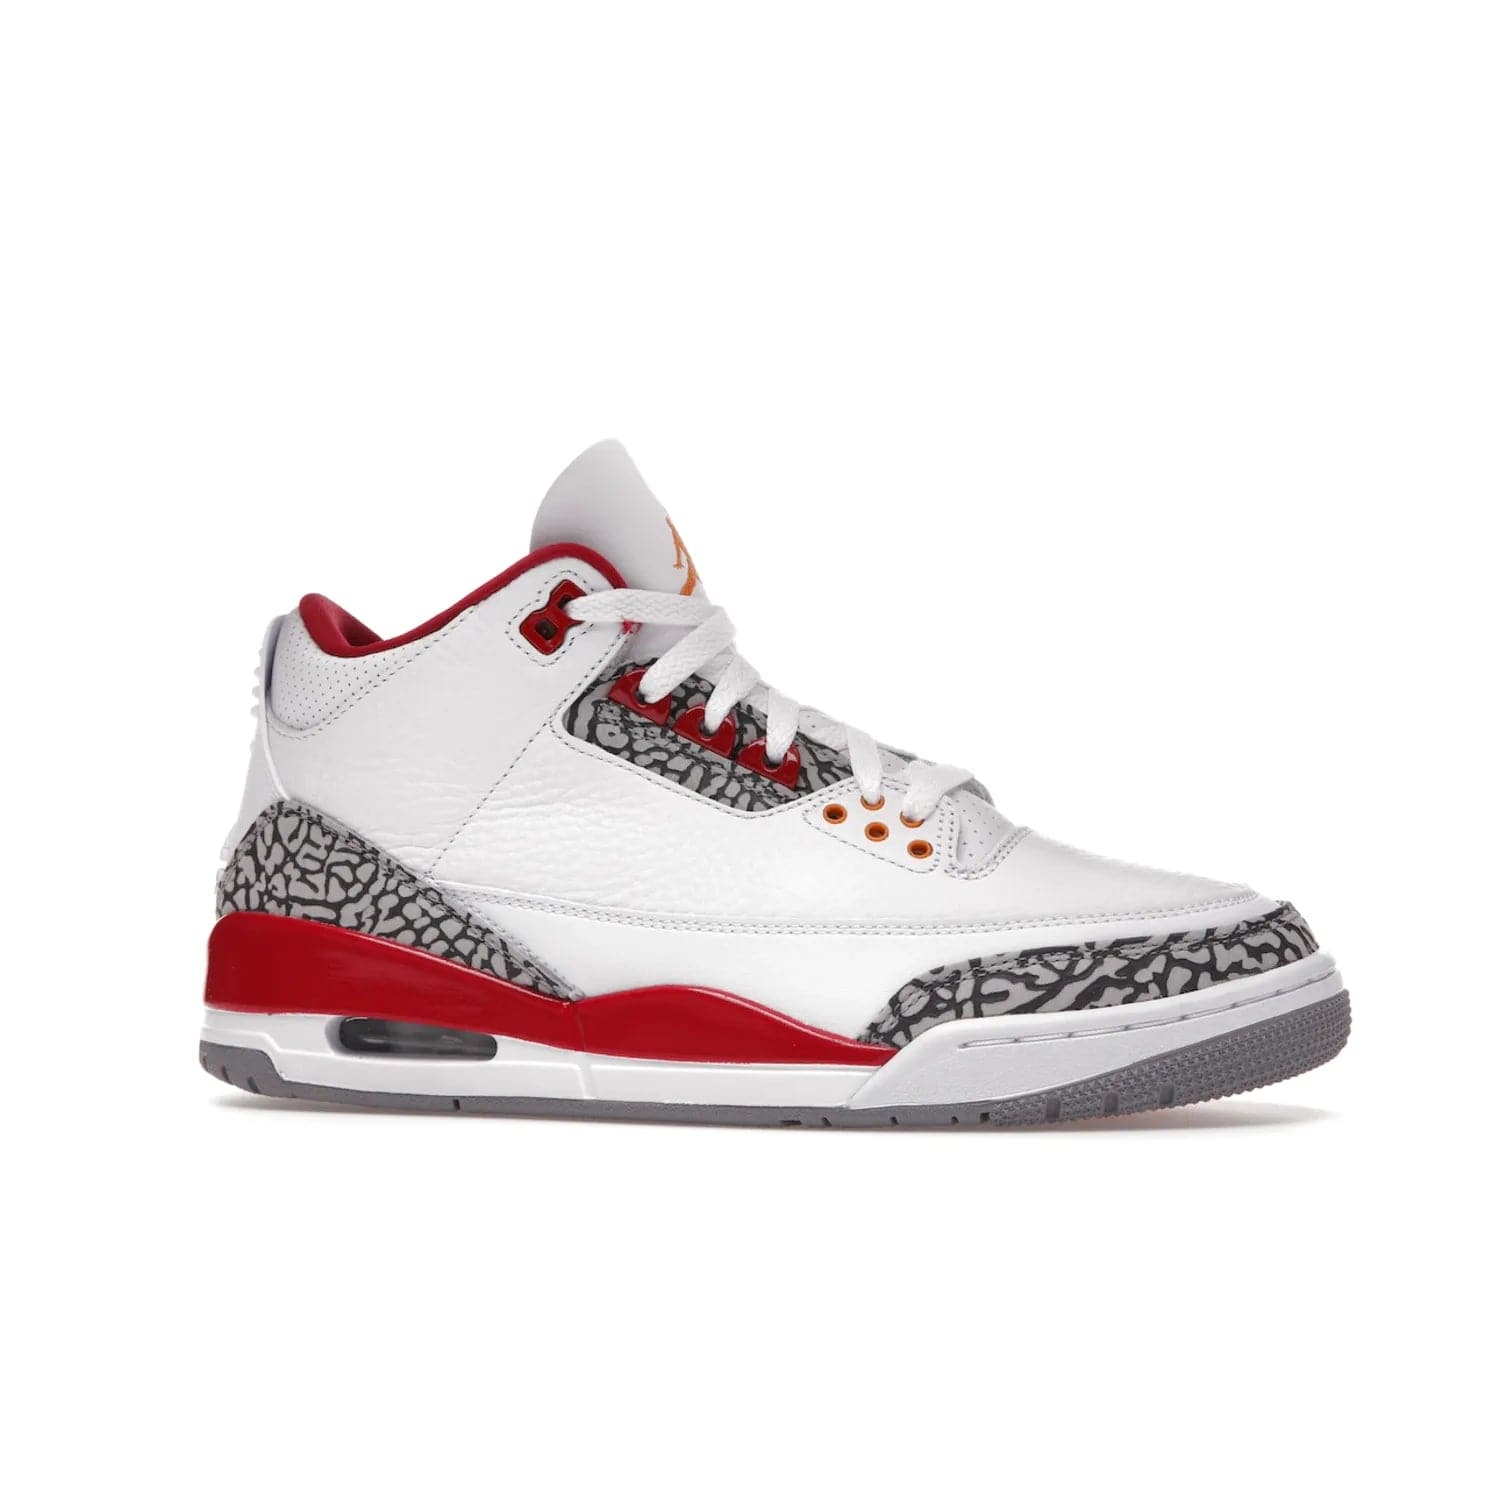 Jordan 3 Retro Cardinal Red - Image 3 - Only at www.BallersClubKickz.com - Air Jordan 3 Retro Cardinal Red combines classic style and modern appeal - white tumbled leather, signature Elephant Print overlays, cardinal red midsoles, Jumpman logo embroidery. Available Feb 2022.